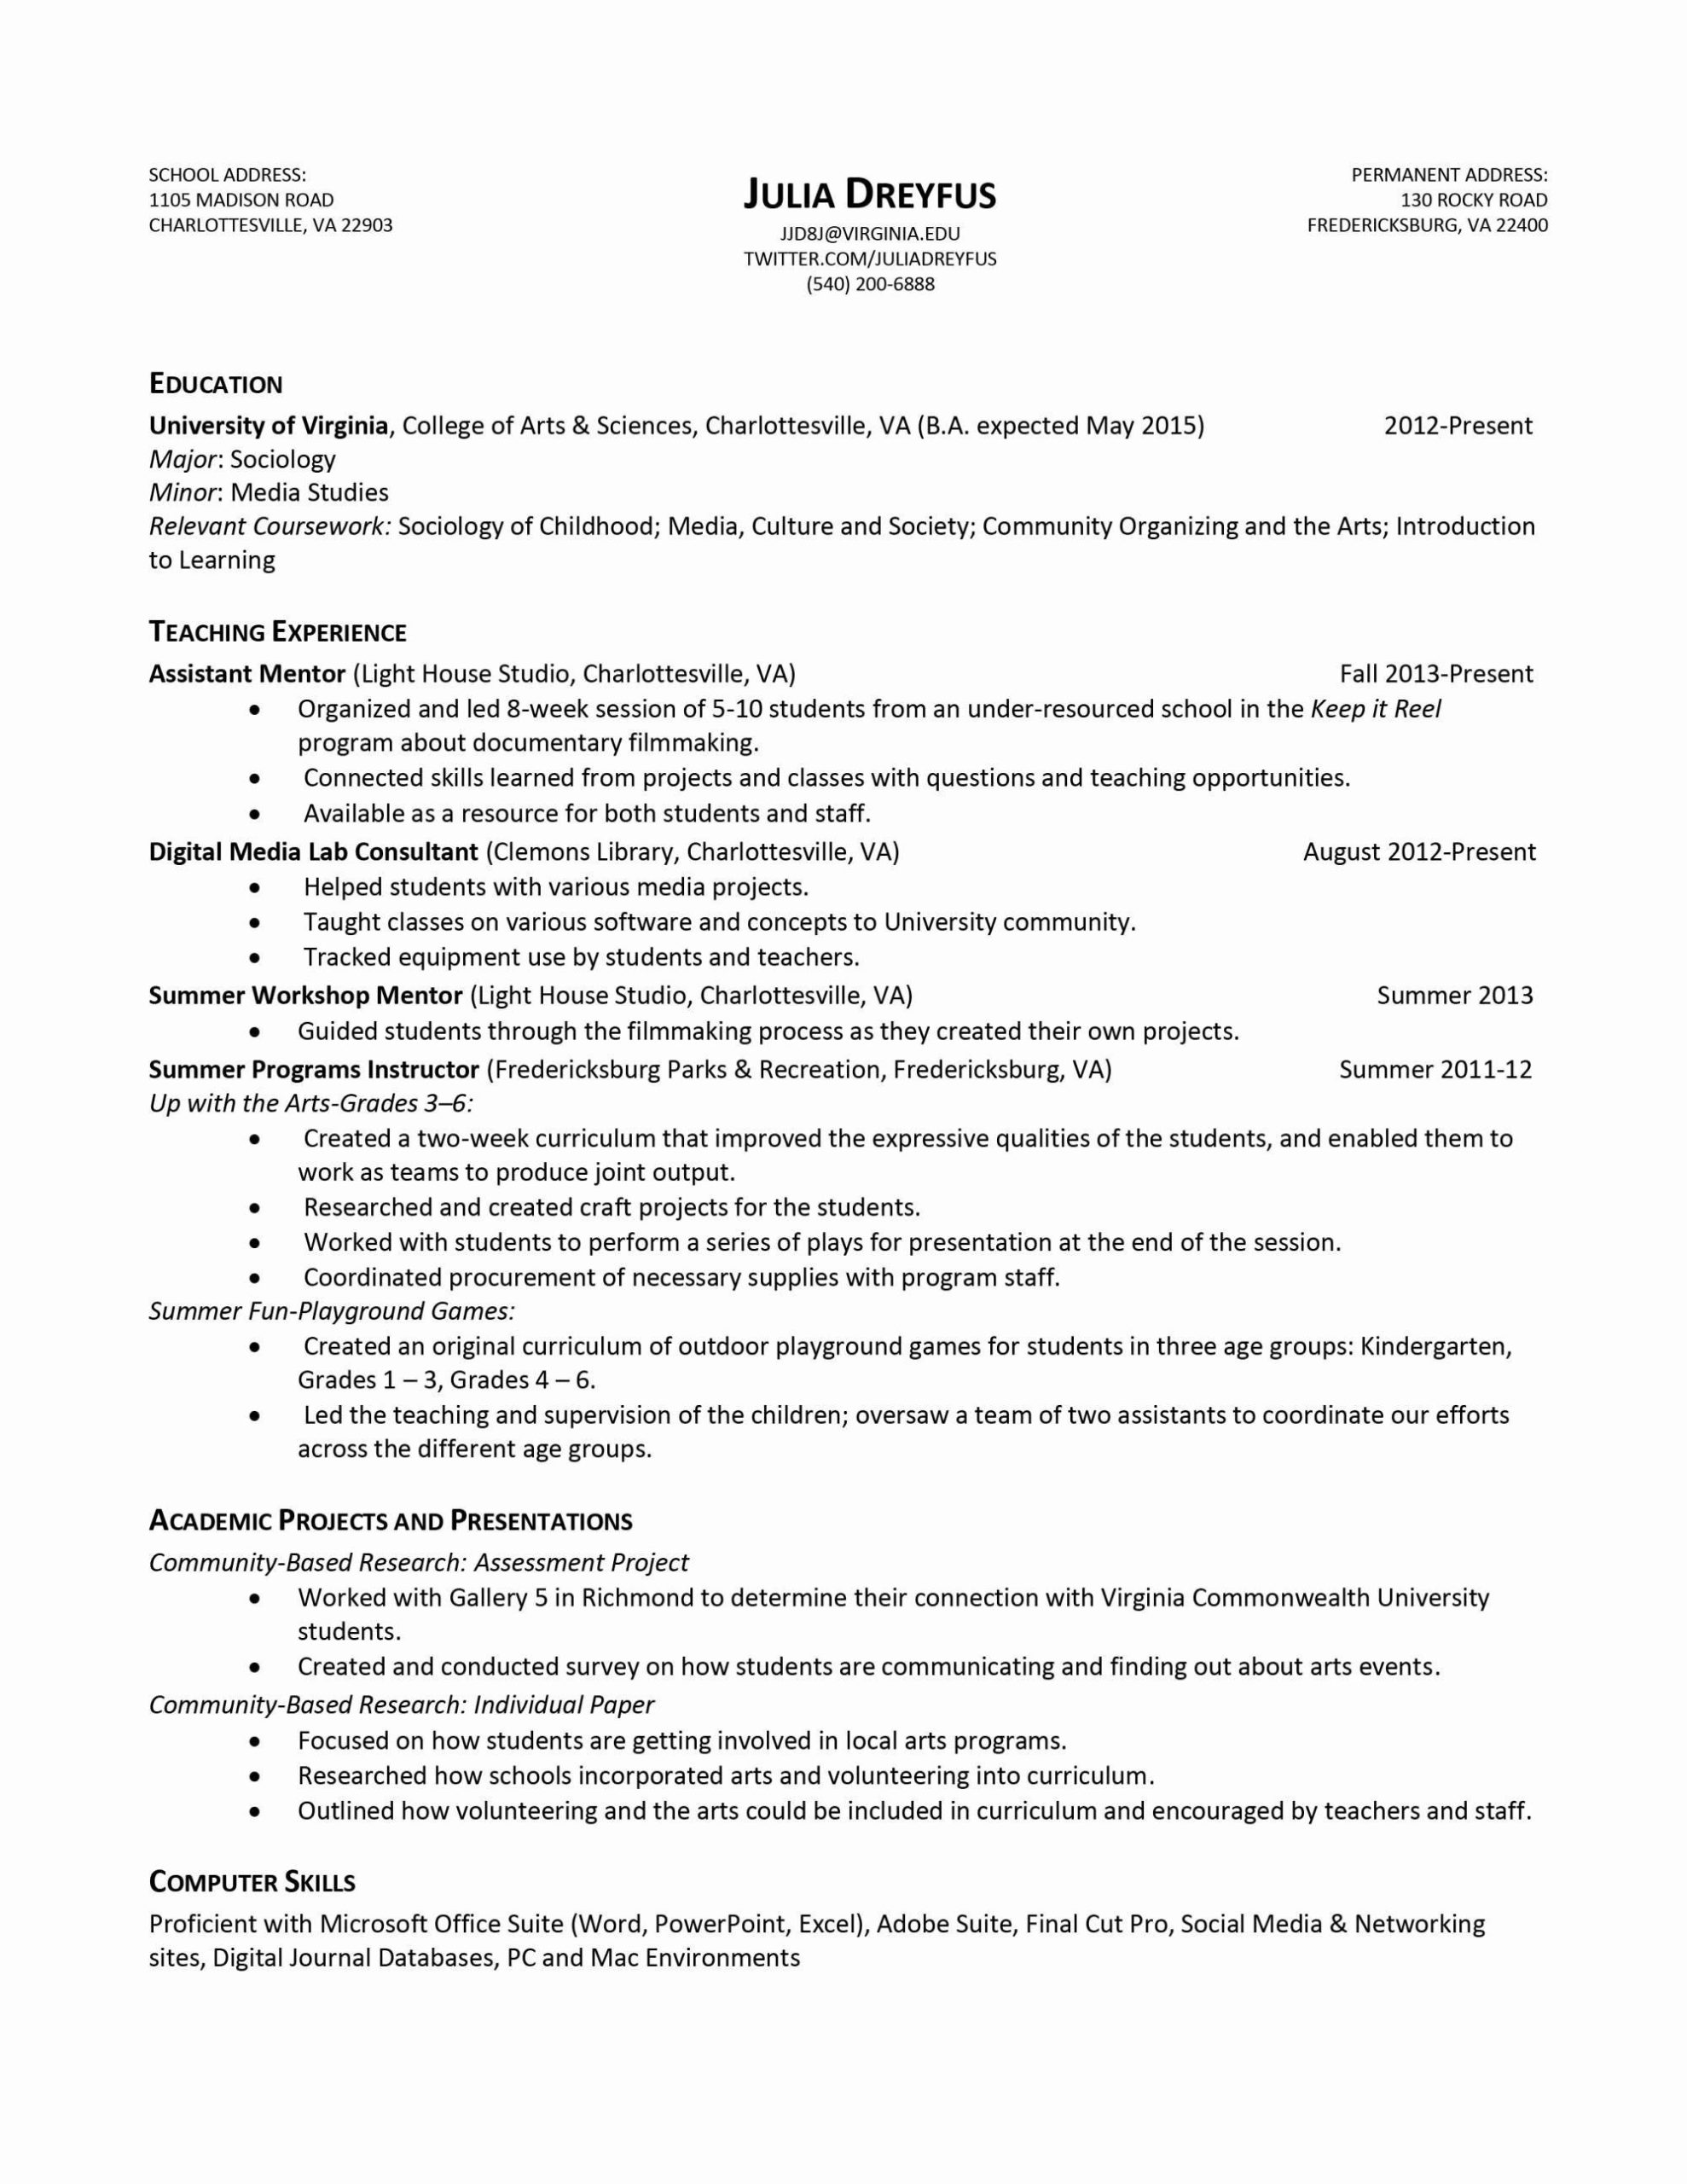 Parks and Recreation Director Resume Sample Wall Street Oasis Resume Template Best Of 12 13 Ministry Resume …